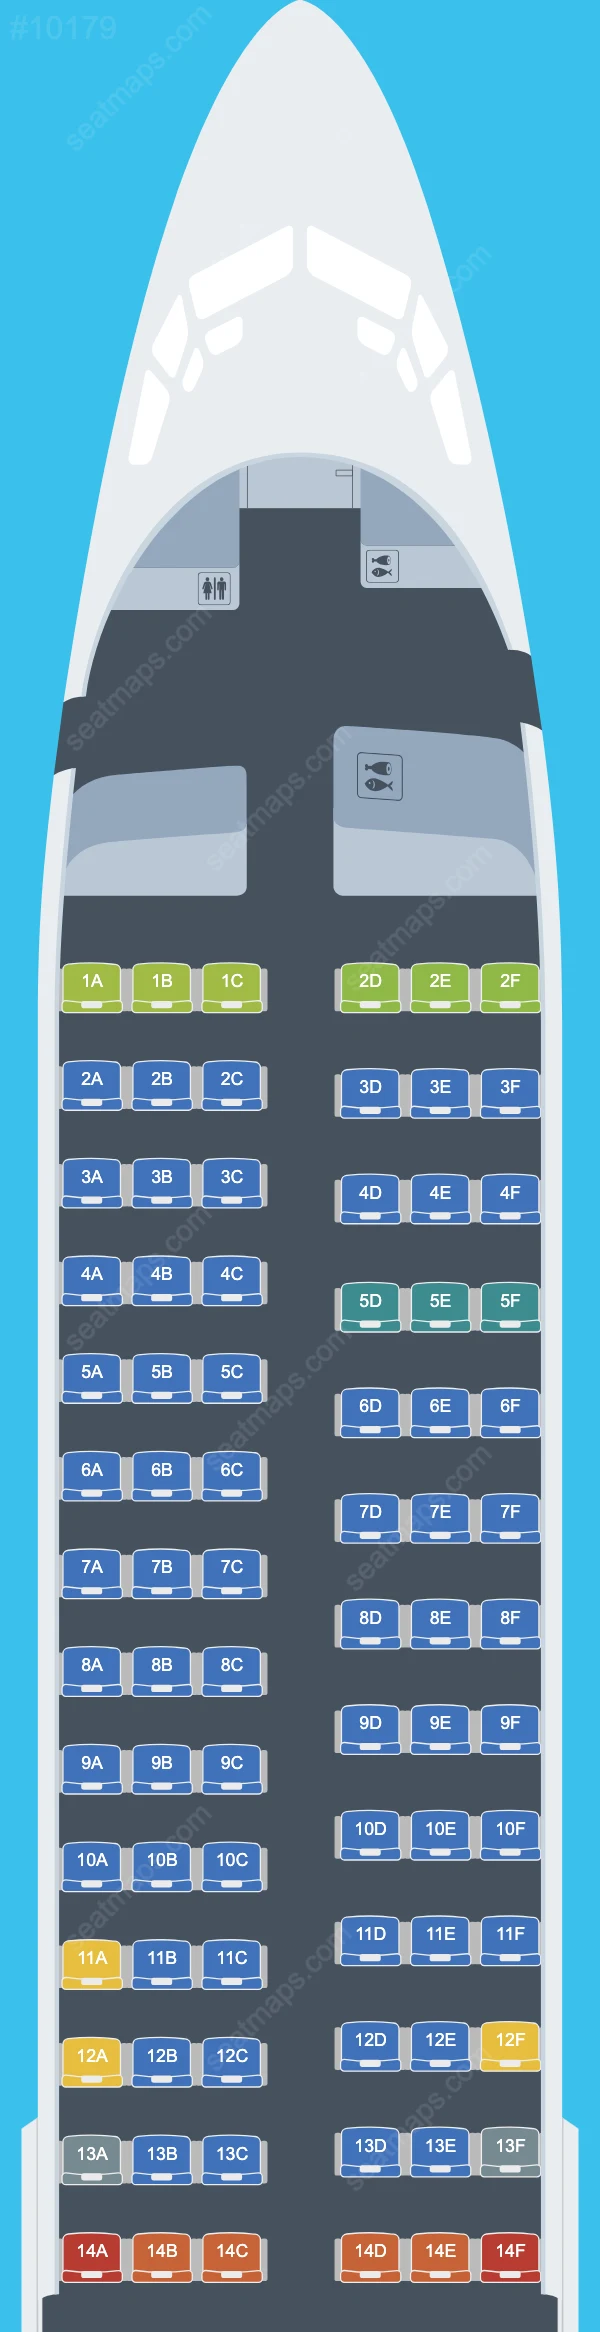 SkyUp Airlines Boeing 737 Seat Maps 737-800